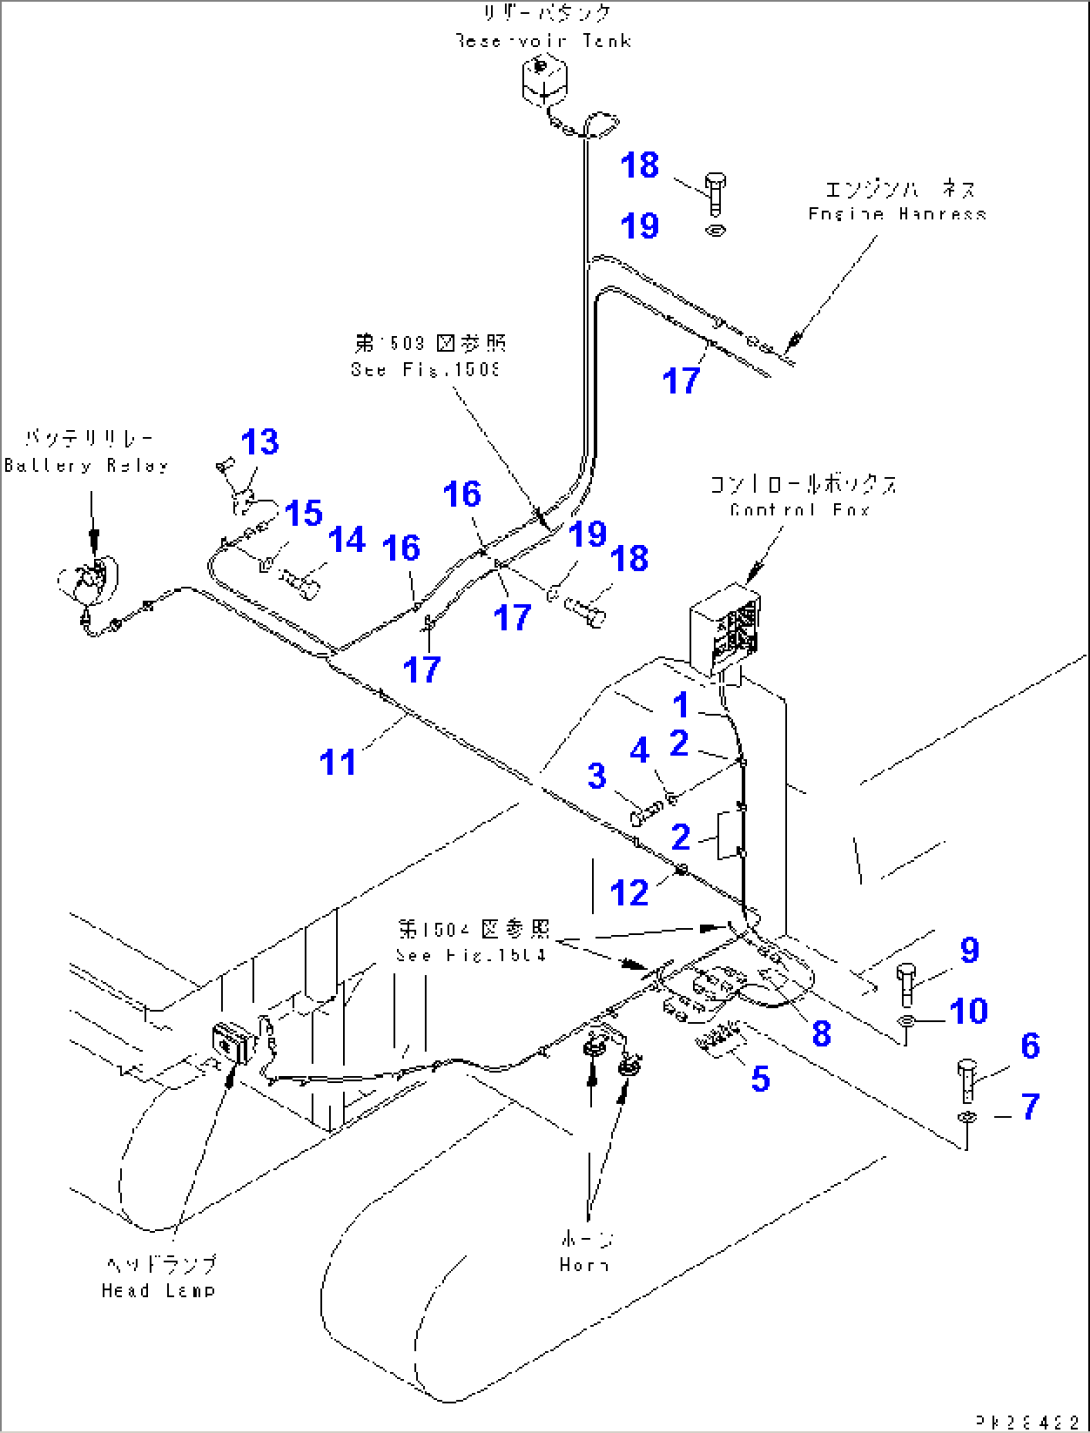 ELECTRICAL SYSTEM (1/4) (CONTROL BOX LINE)